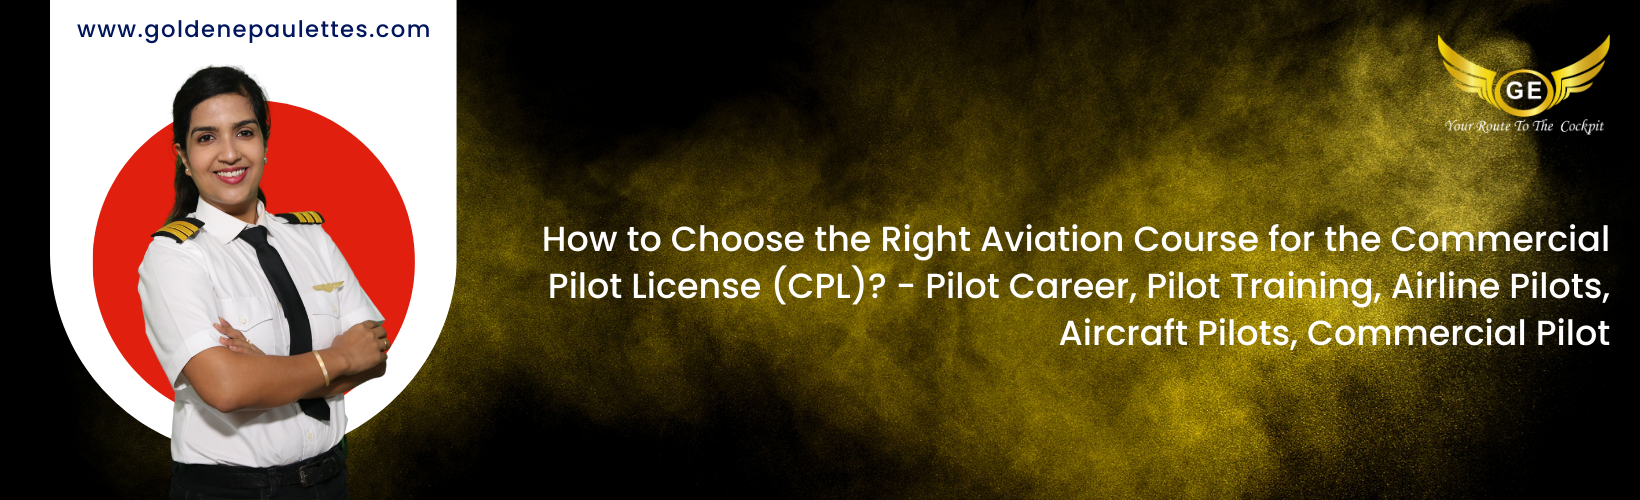 How to Choose the Right Aviation Course for the Commercial Pilot License (CPL)